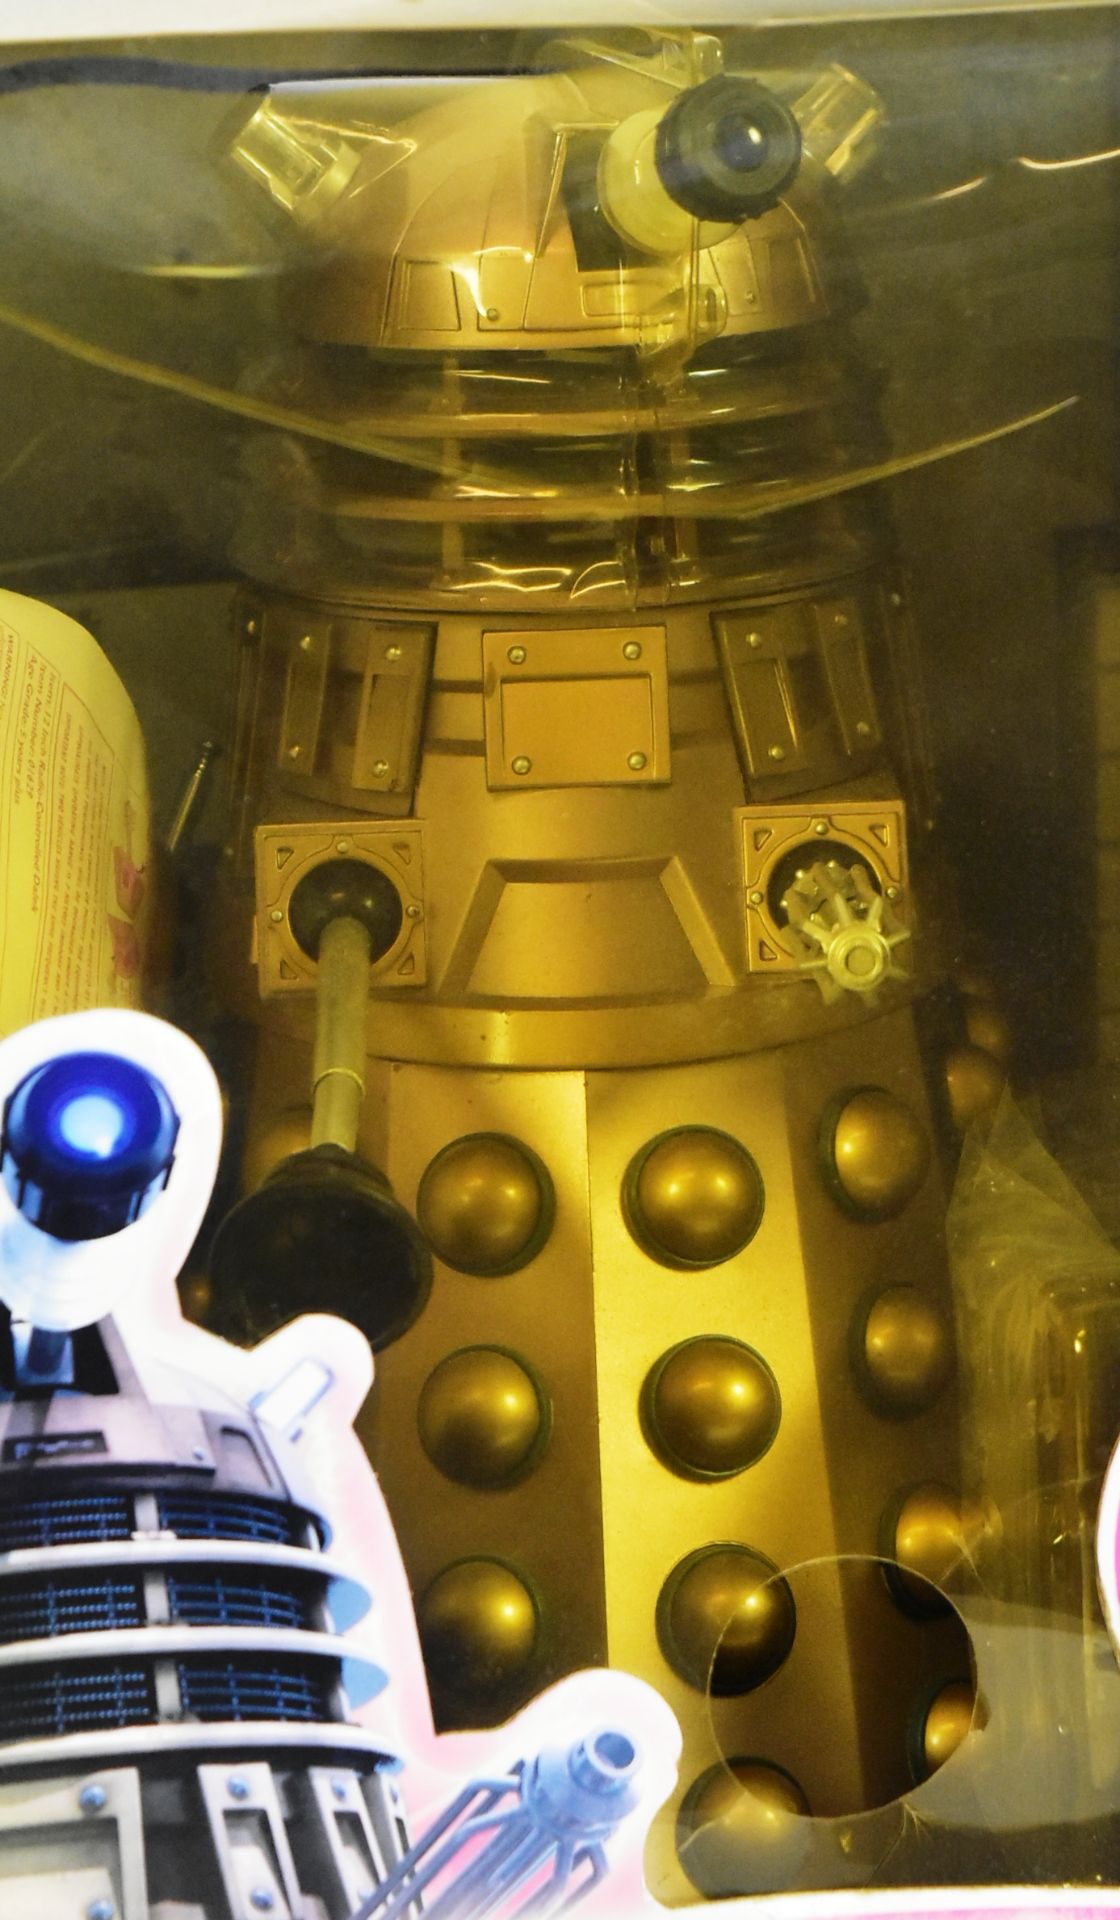 DOCTOR WHO - CHARACTER - LARGE SCALE RADIO CONTROLLED DALEK - Image 2 of 3